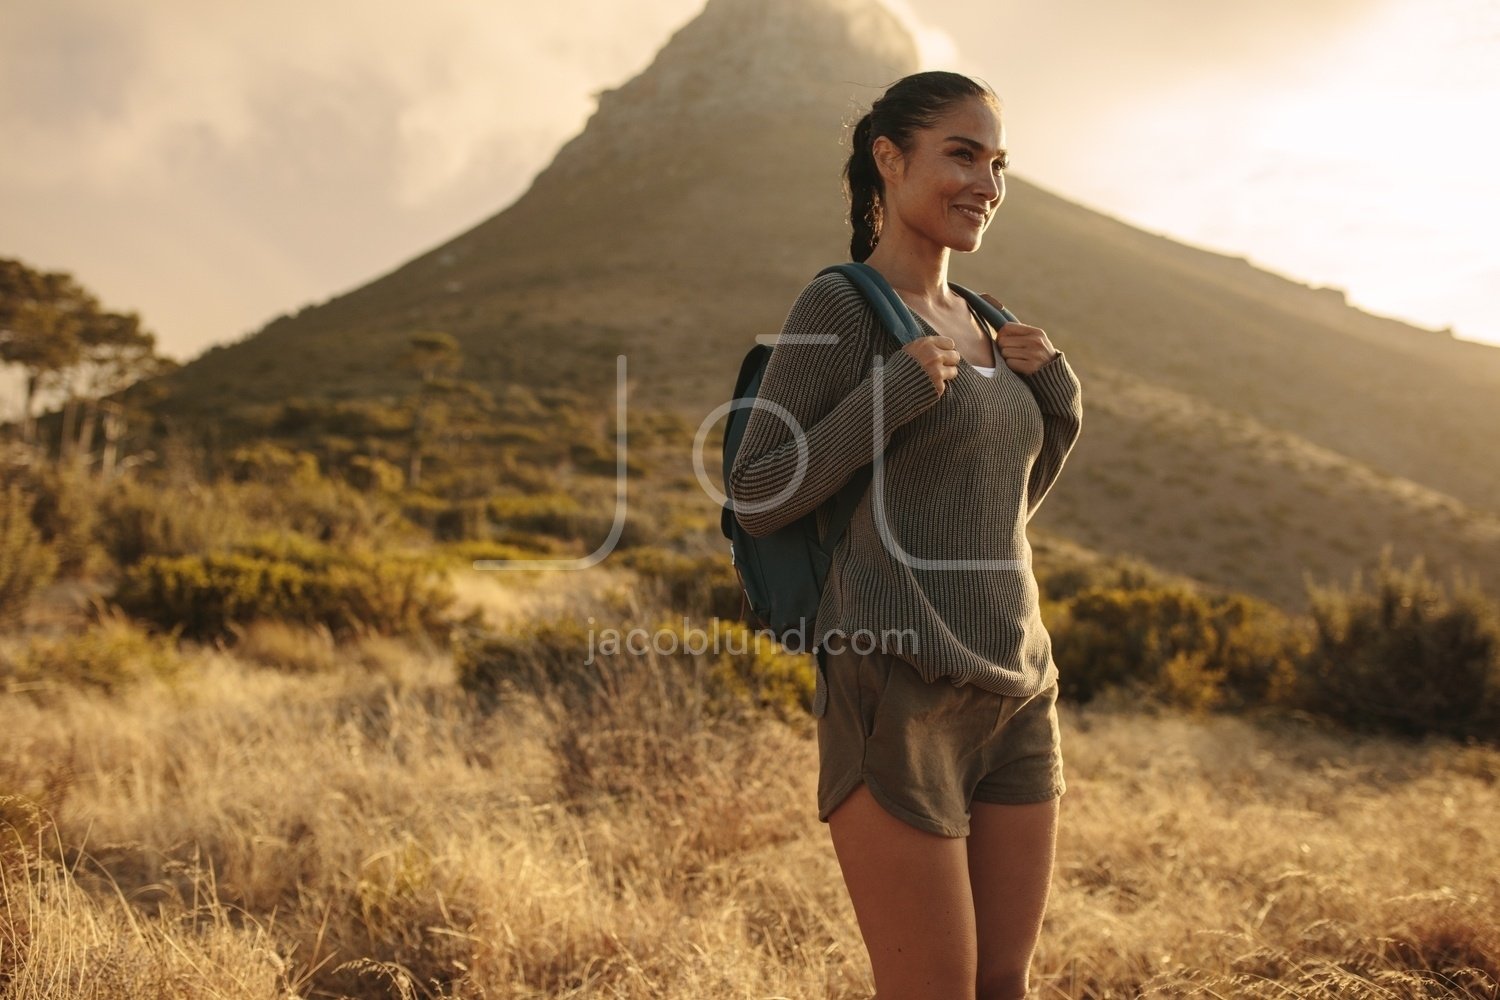 Beautiful hiker woman trekking in nature – Jacob Lund Photography